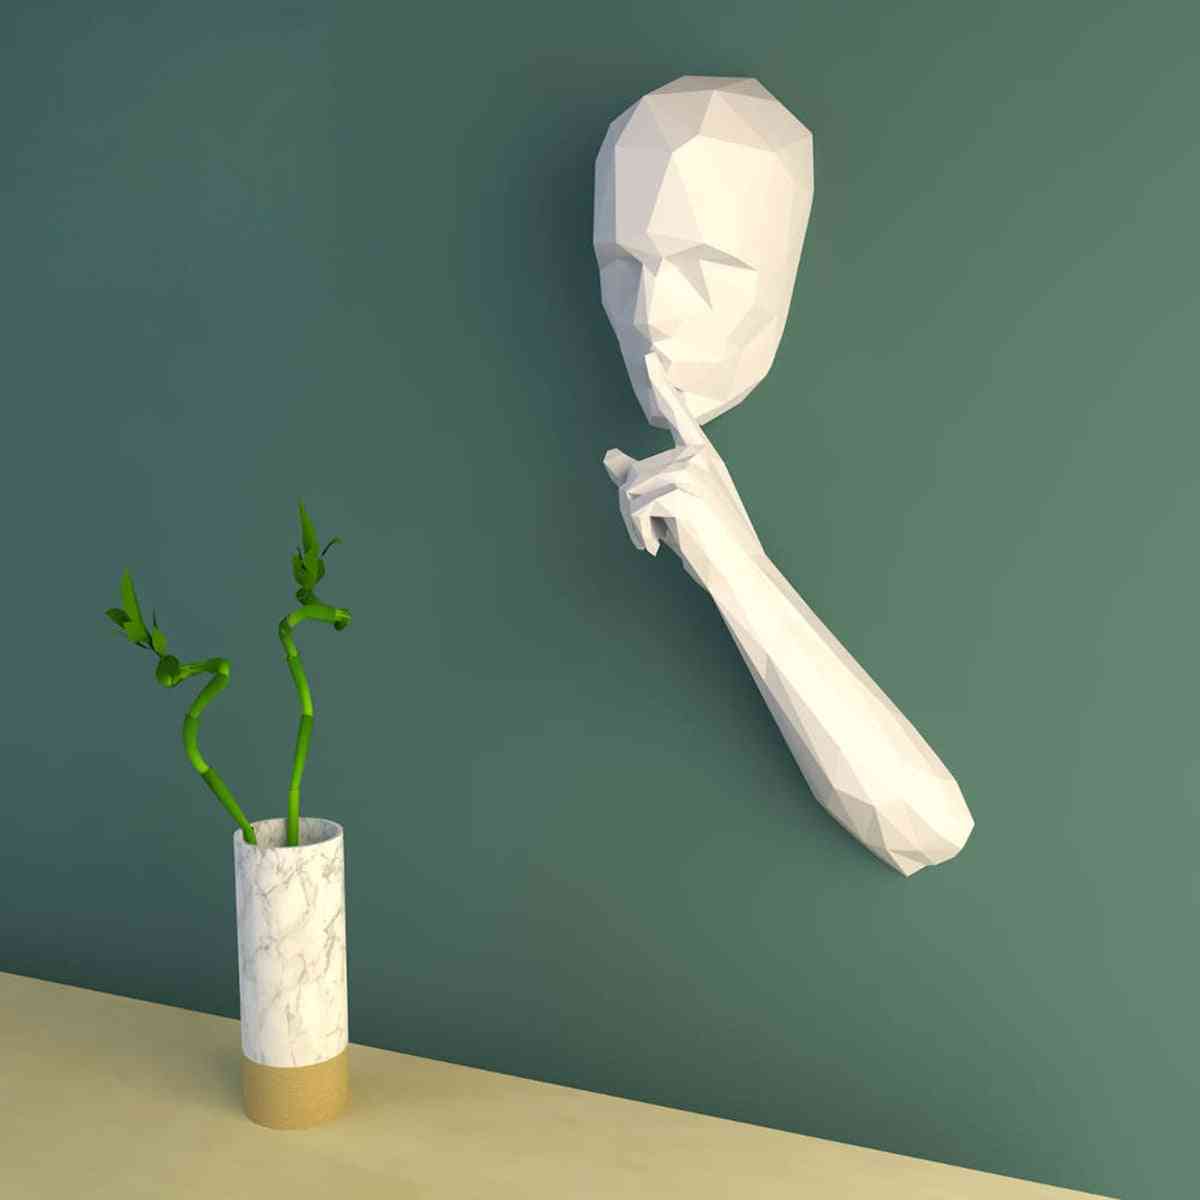 3d Paper Model Of The Silent Person - Home Decor